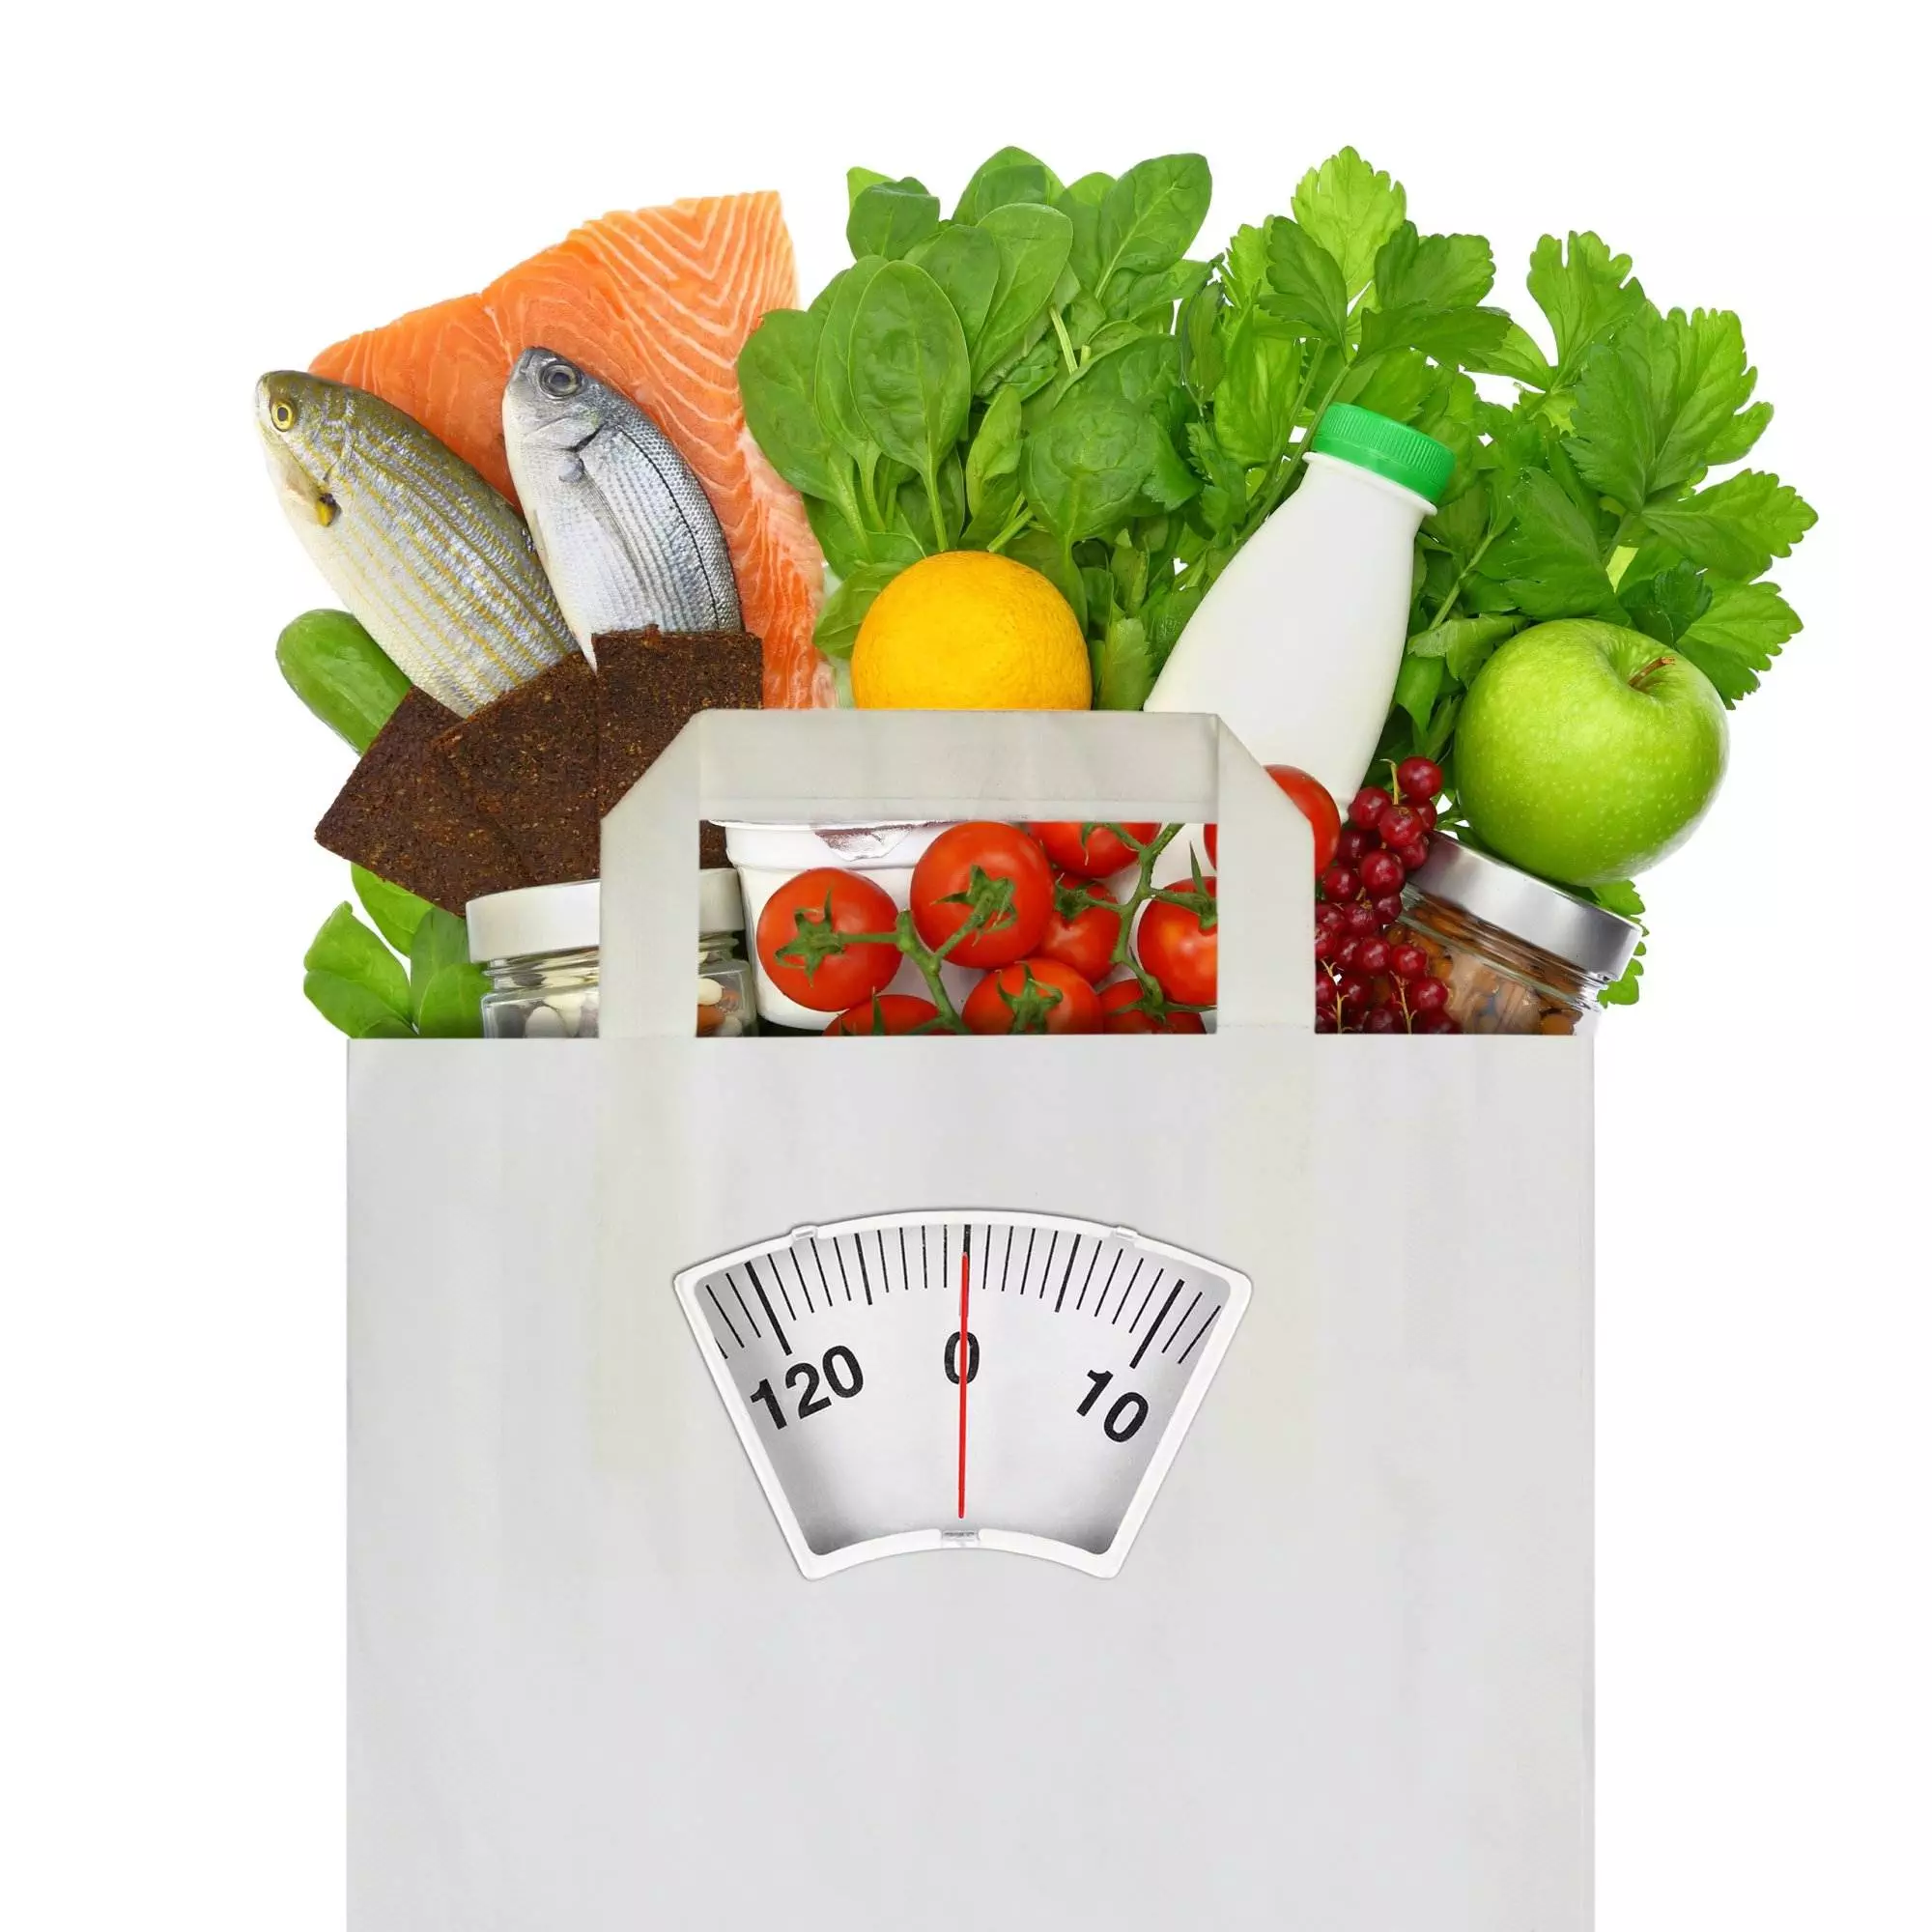 Healthy food on scale symbolizing diet and weight loss.